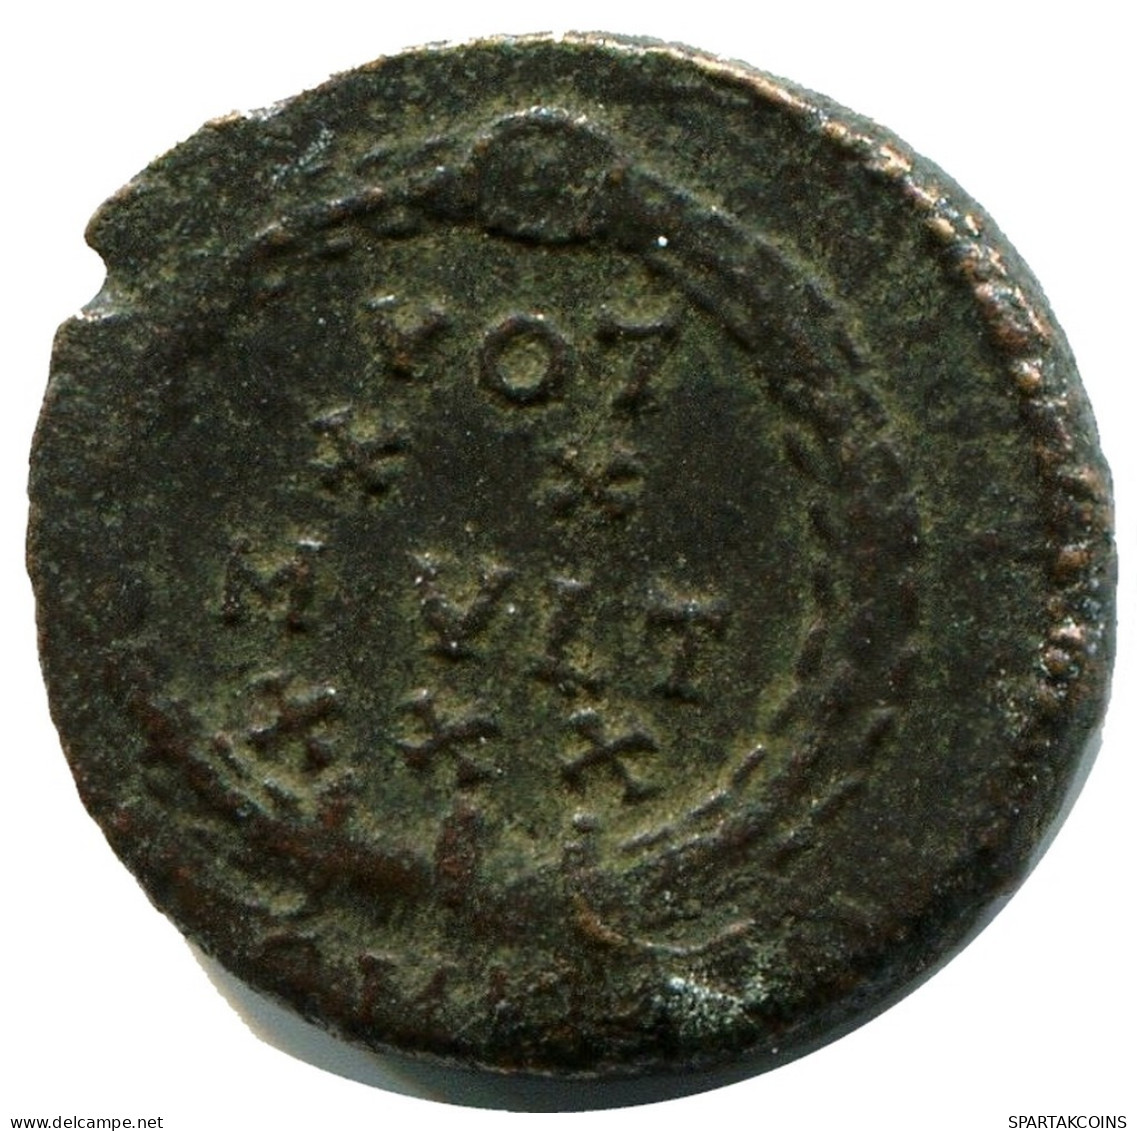 CONSTANS MINTED IN CYZICUS FROM THE ROYAL ONTARIO MUSEUM #ANC11654.14.D.A - L'Empire Chrétien (307 à 363)